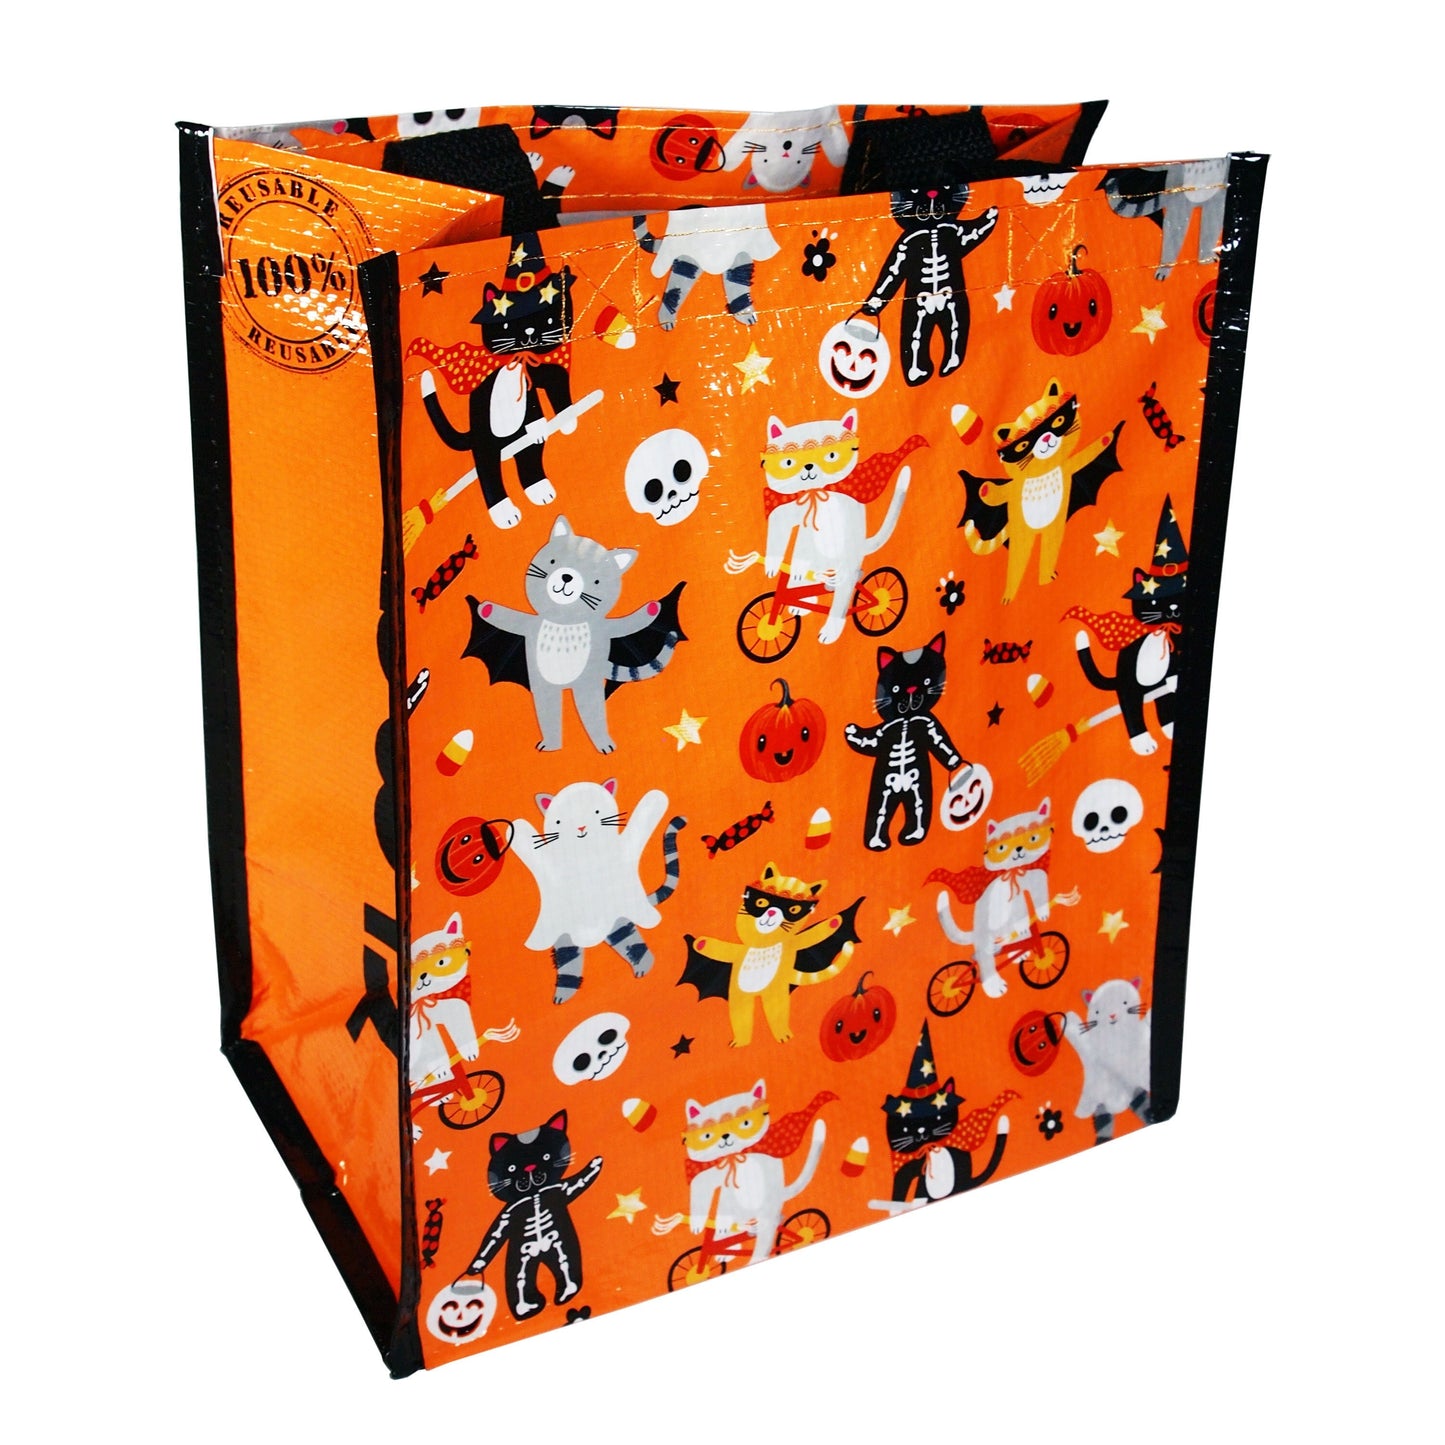 Reusable Eco Friendly Halloween Trick or Treat Bag - Cats Galore